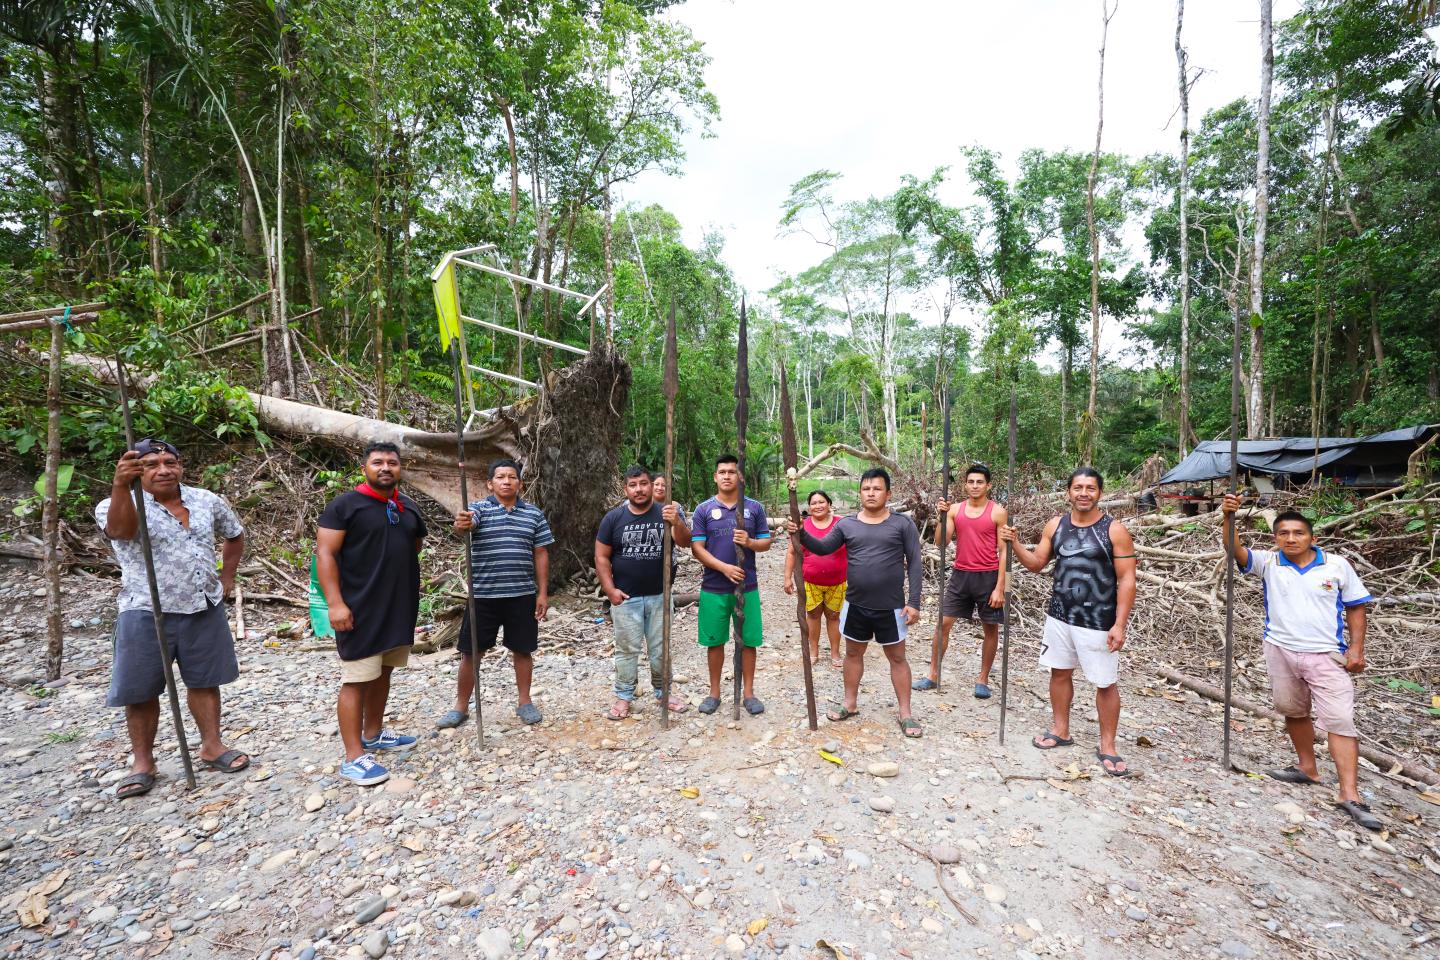 Indigenous people in the Amazon holding spears blocking a road